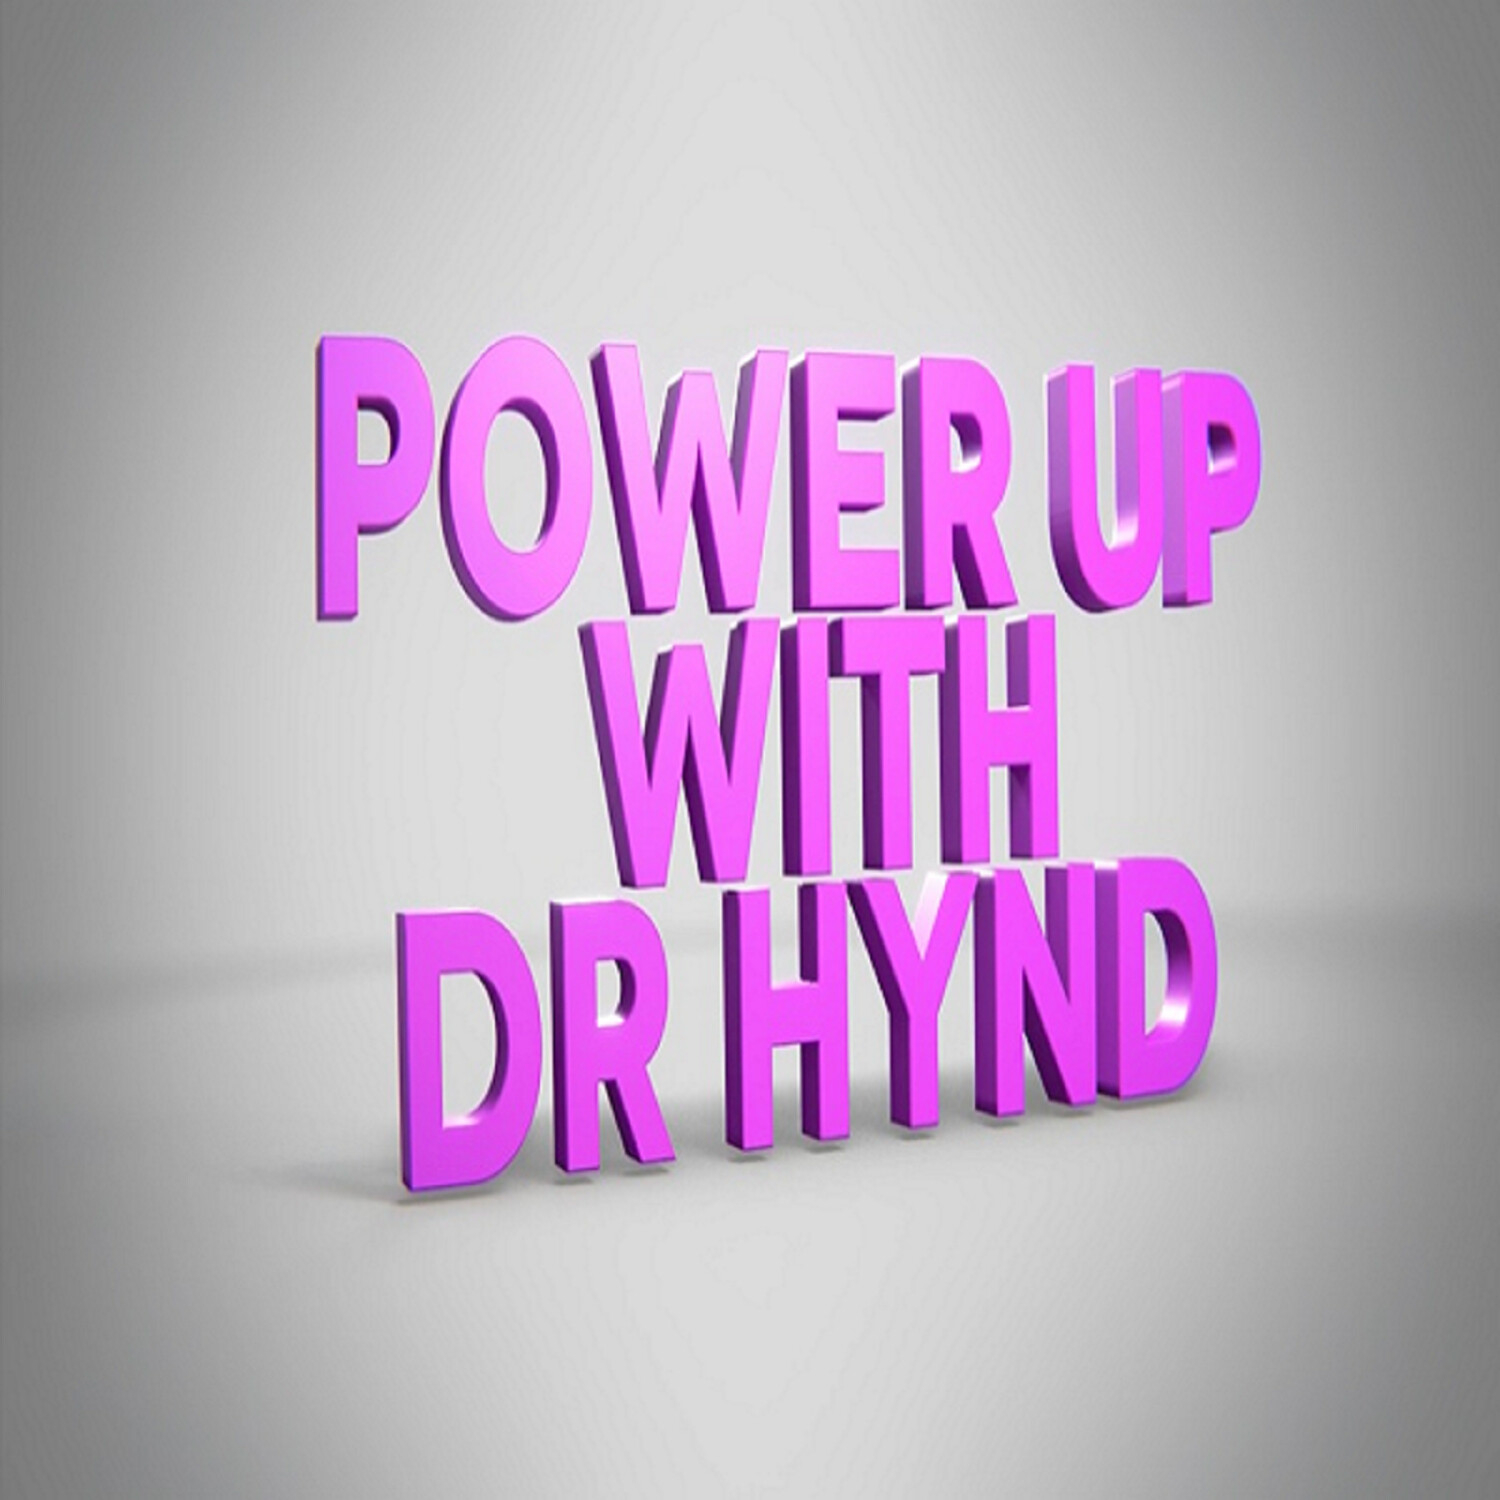 Women's Empowerment Series with Dr. Hynd and Cristina Grey from London